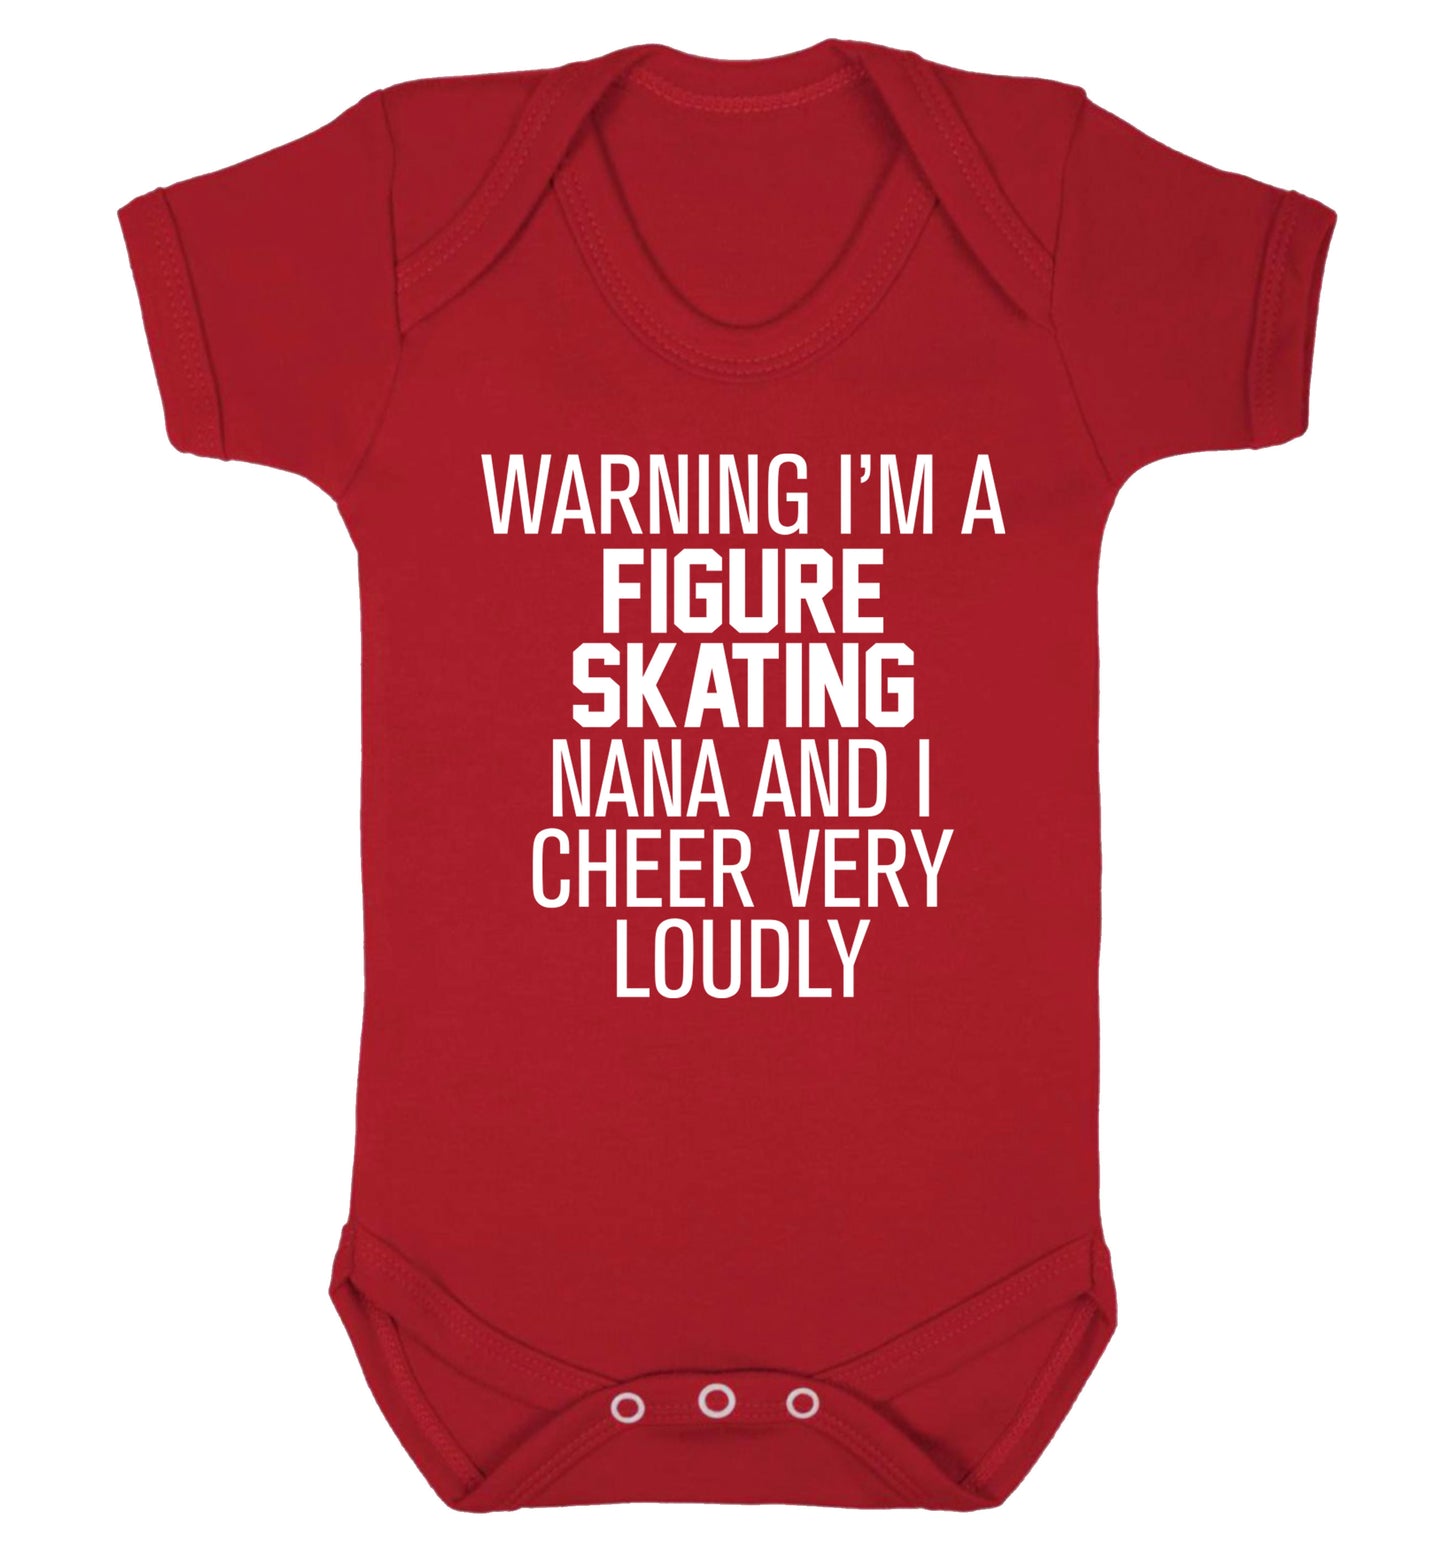 Warning I'm a figure skating nana and I cheer very loudly Baby Vest red 18-24 months